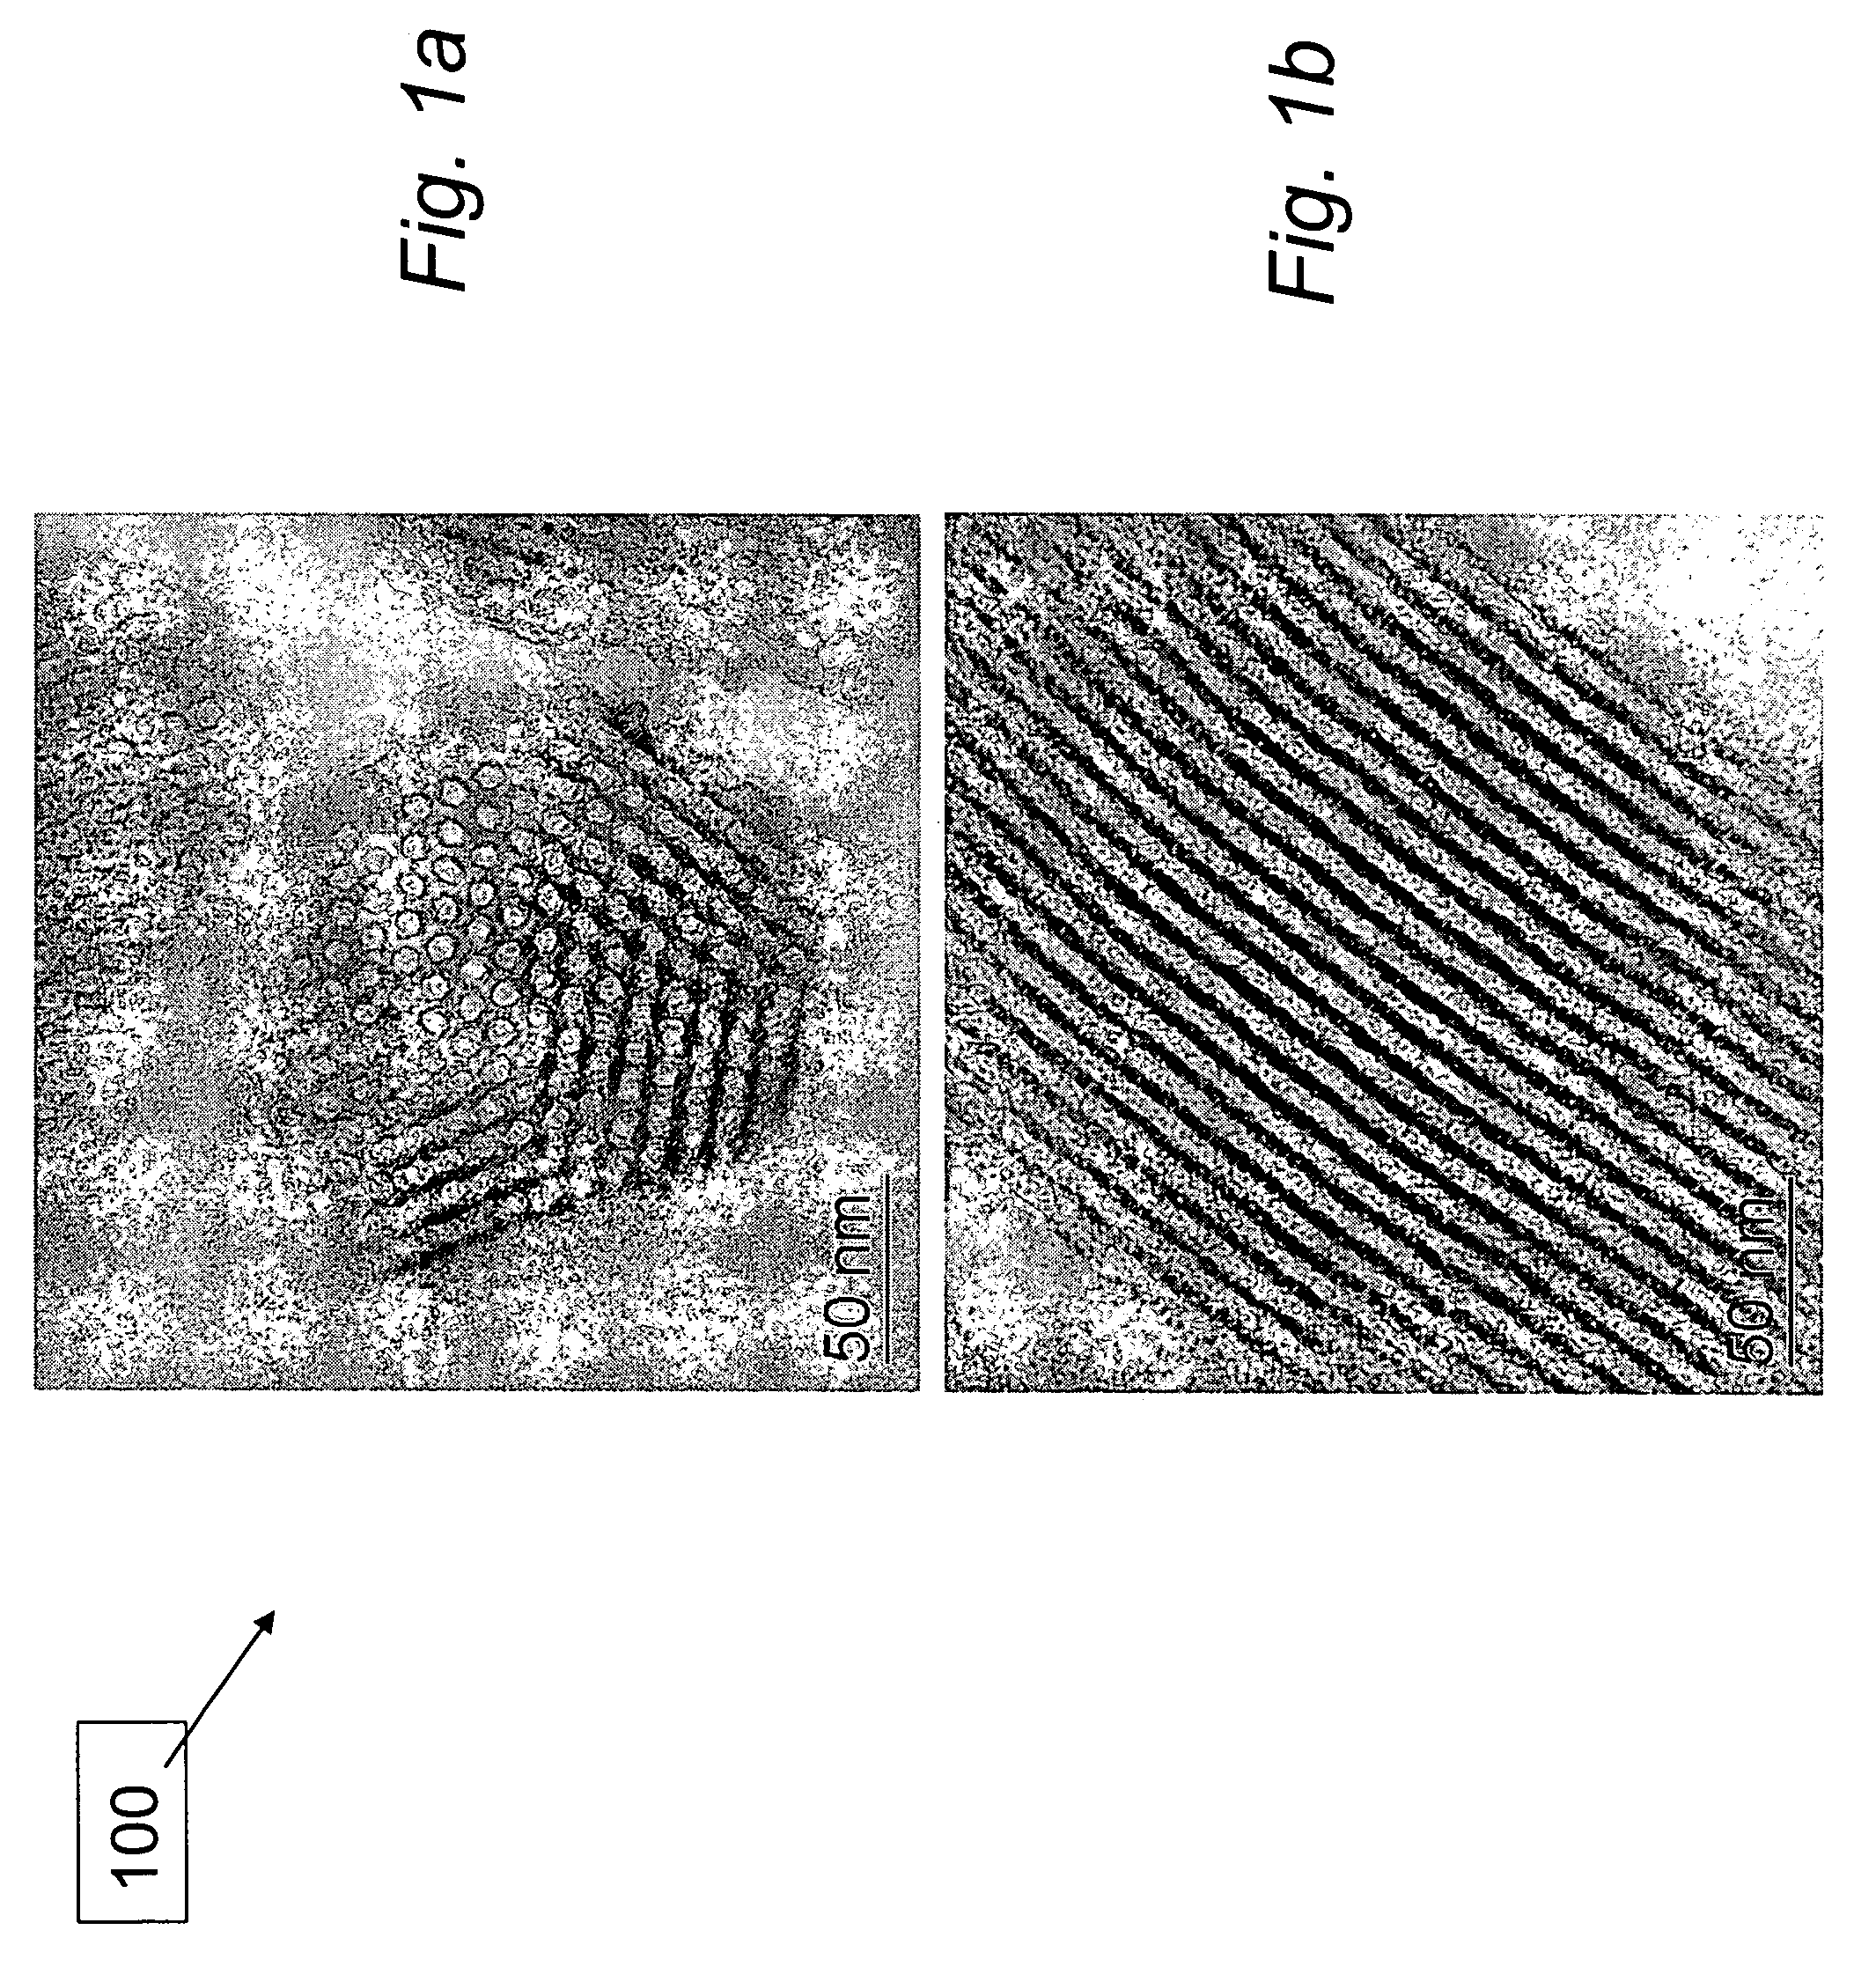 Materials for storage and release of hydrogen and methods for preparing and using same